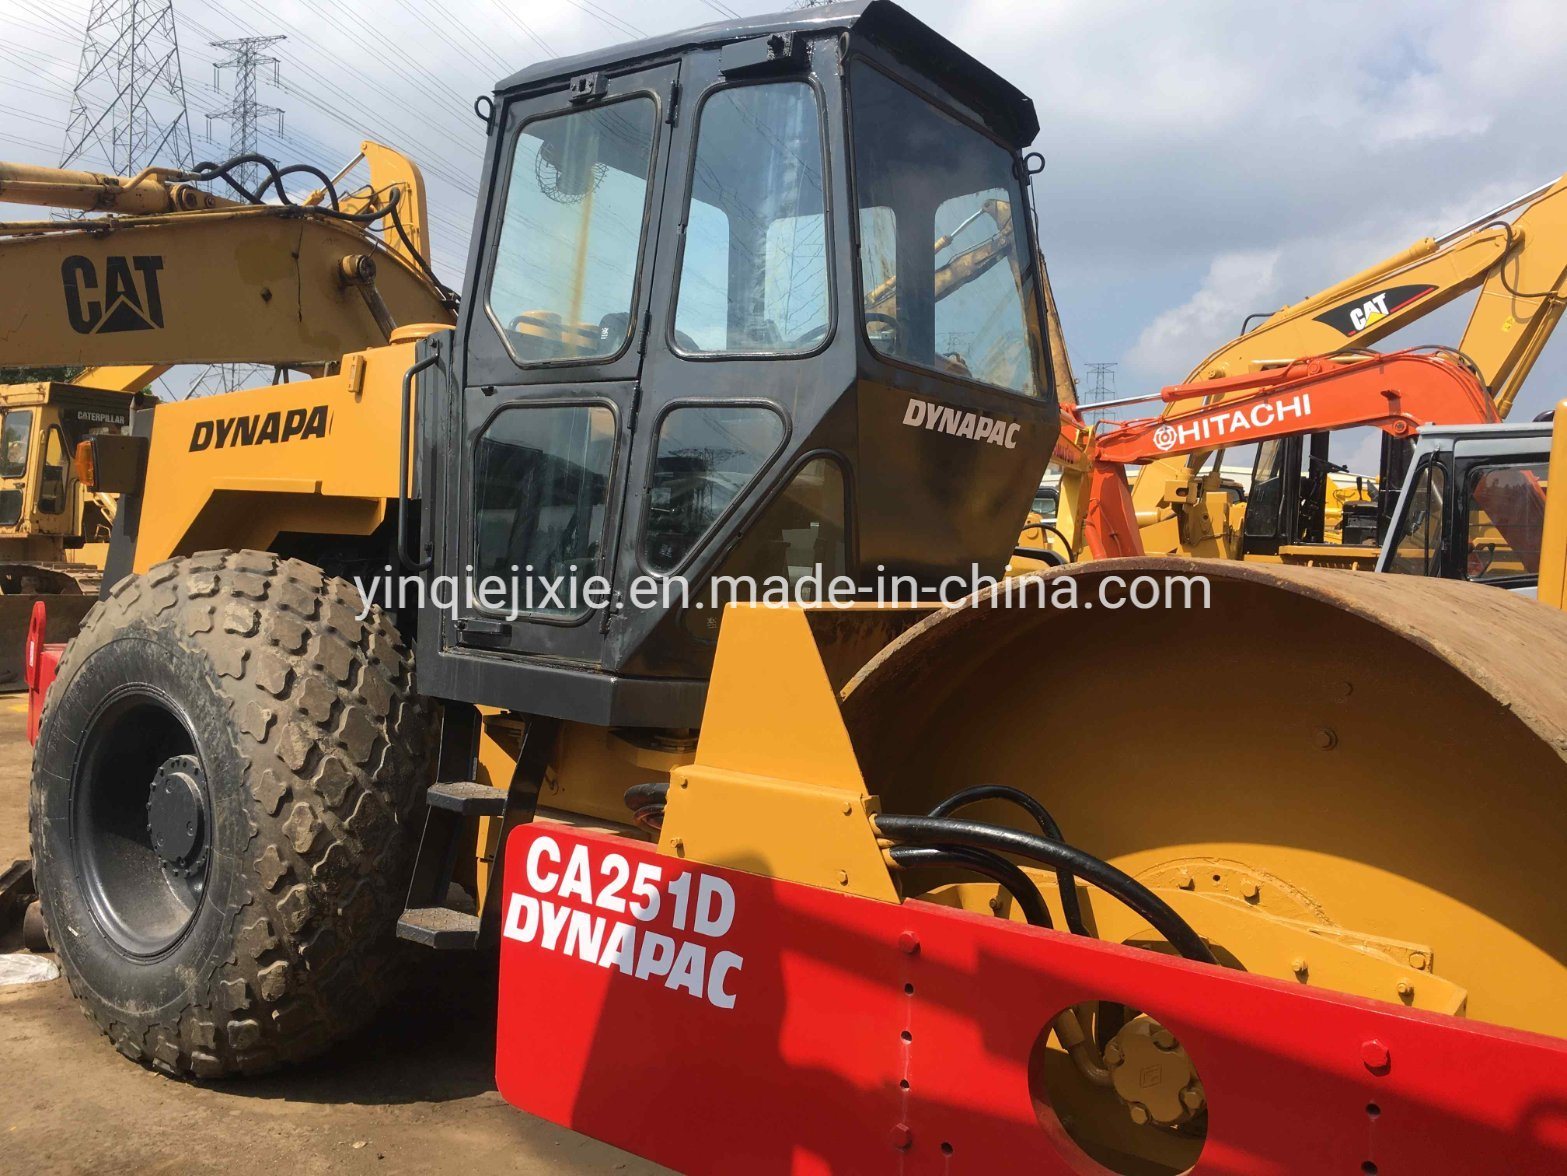 Dynapac Used Road Roller Ca30d Construction Machinery, Used Road Roller Dynapac Ca25, Ca251, Ca30, Ca301